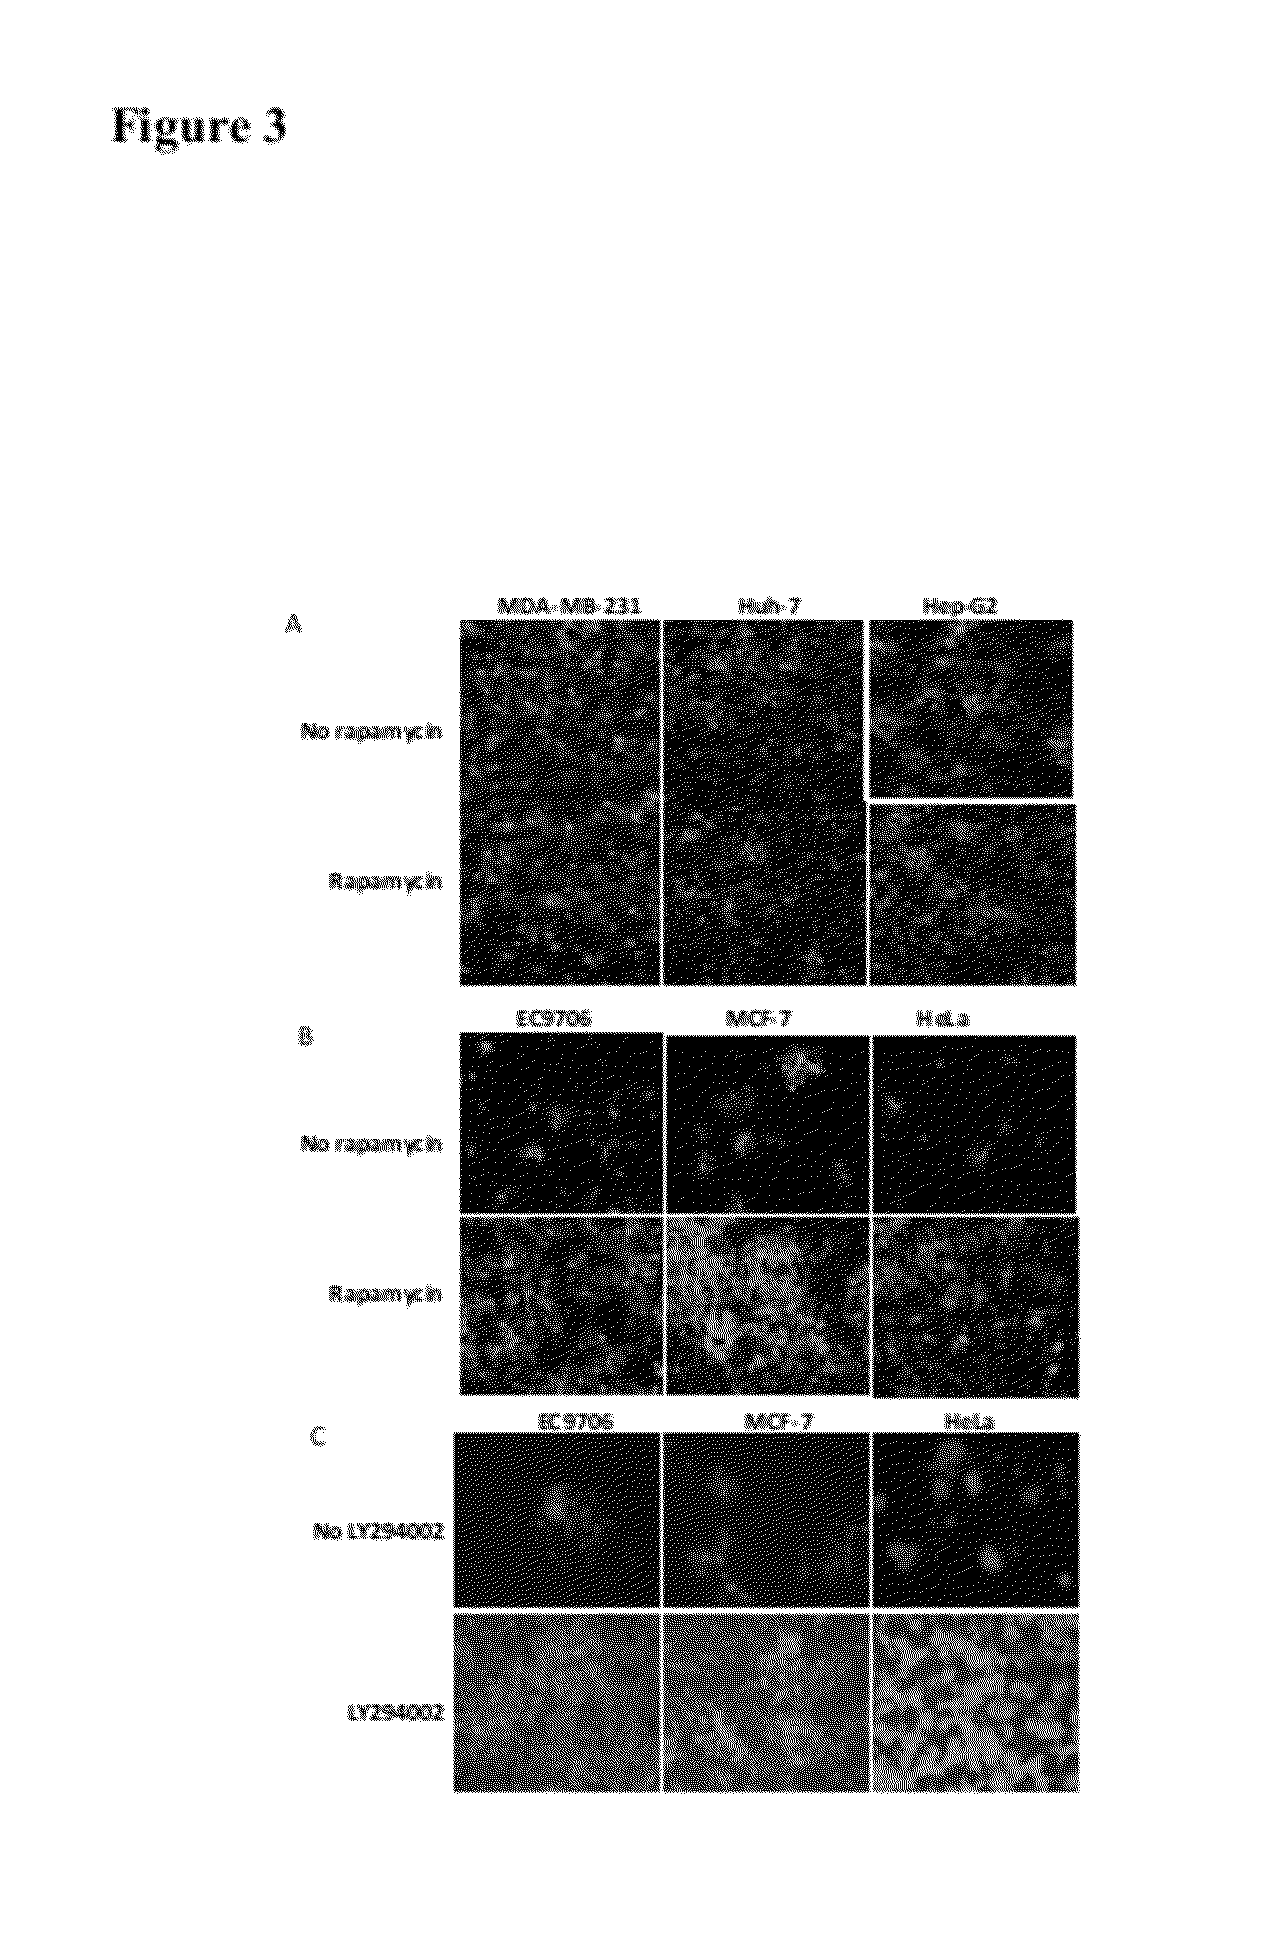 Method for increasing the replication of oncolytic HSVs in highly resistant tumor cells using mTOR pathway and PI3K inhibitors